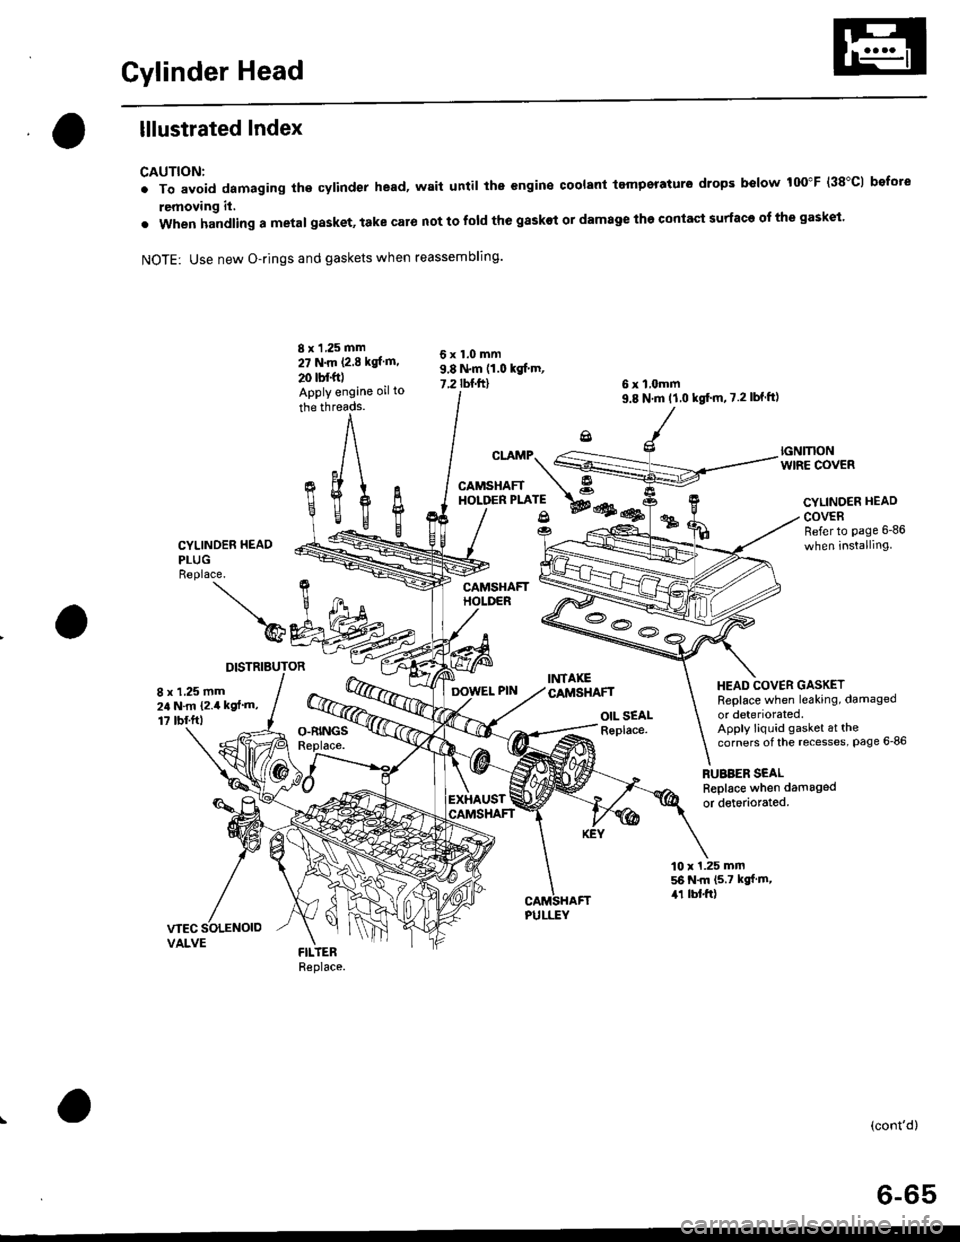 HONDA CIVIC 1998 6.G Service Manual Cylinder Head
lllustrated Index
CAUTION:
. To avoid damaging the cylinder head, wait until the engine coolant tempsraturo drops below 100"F (38"C1 bofote
removing it,
. when handling a metal gasket, t